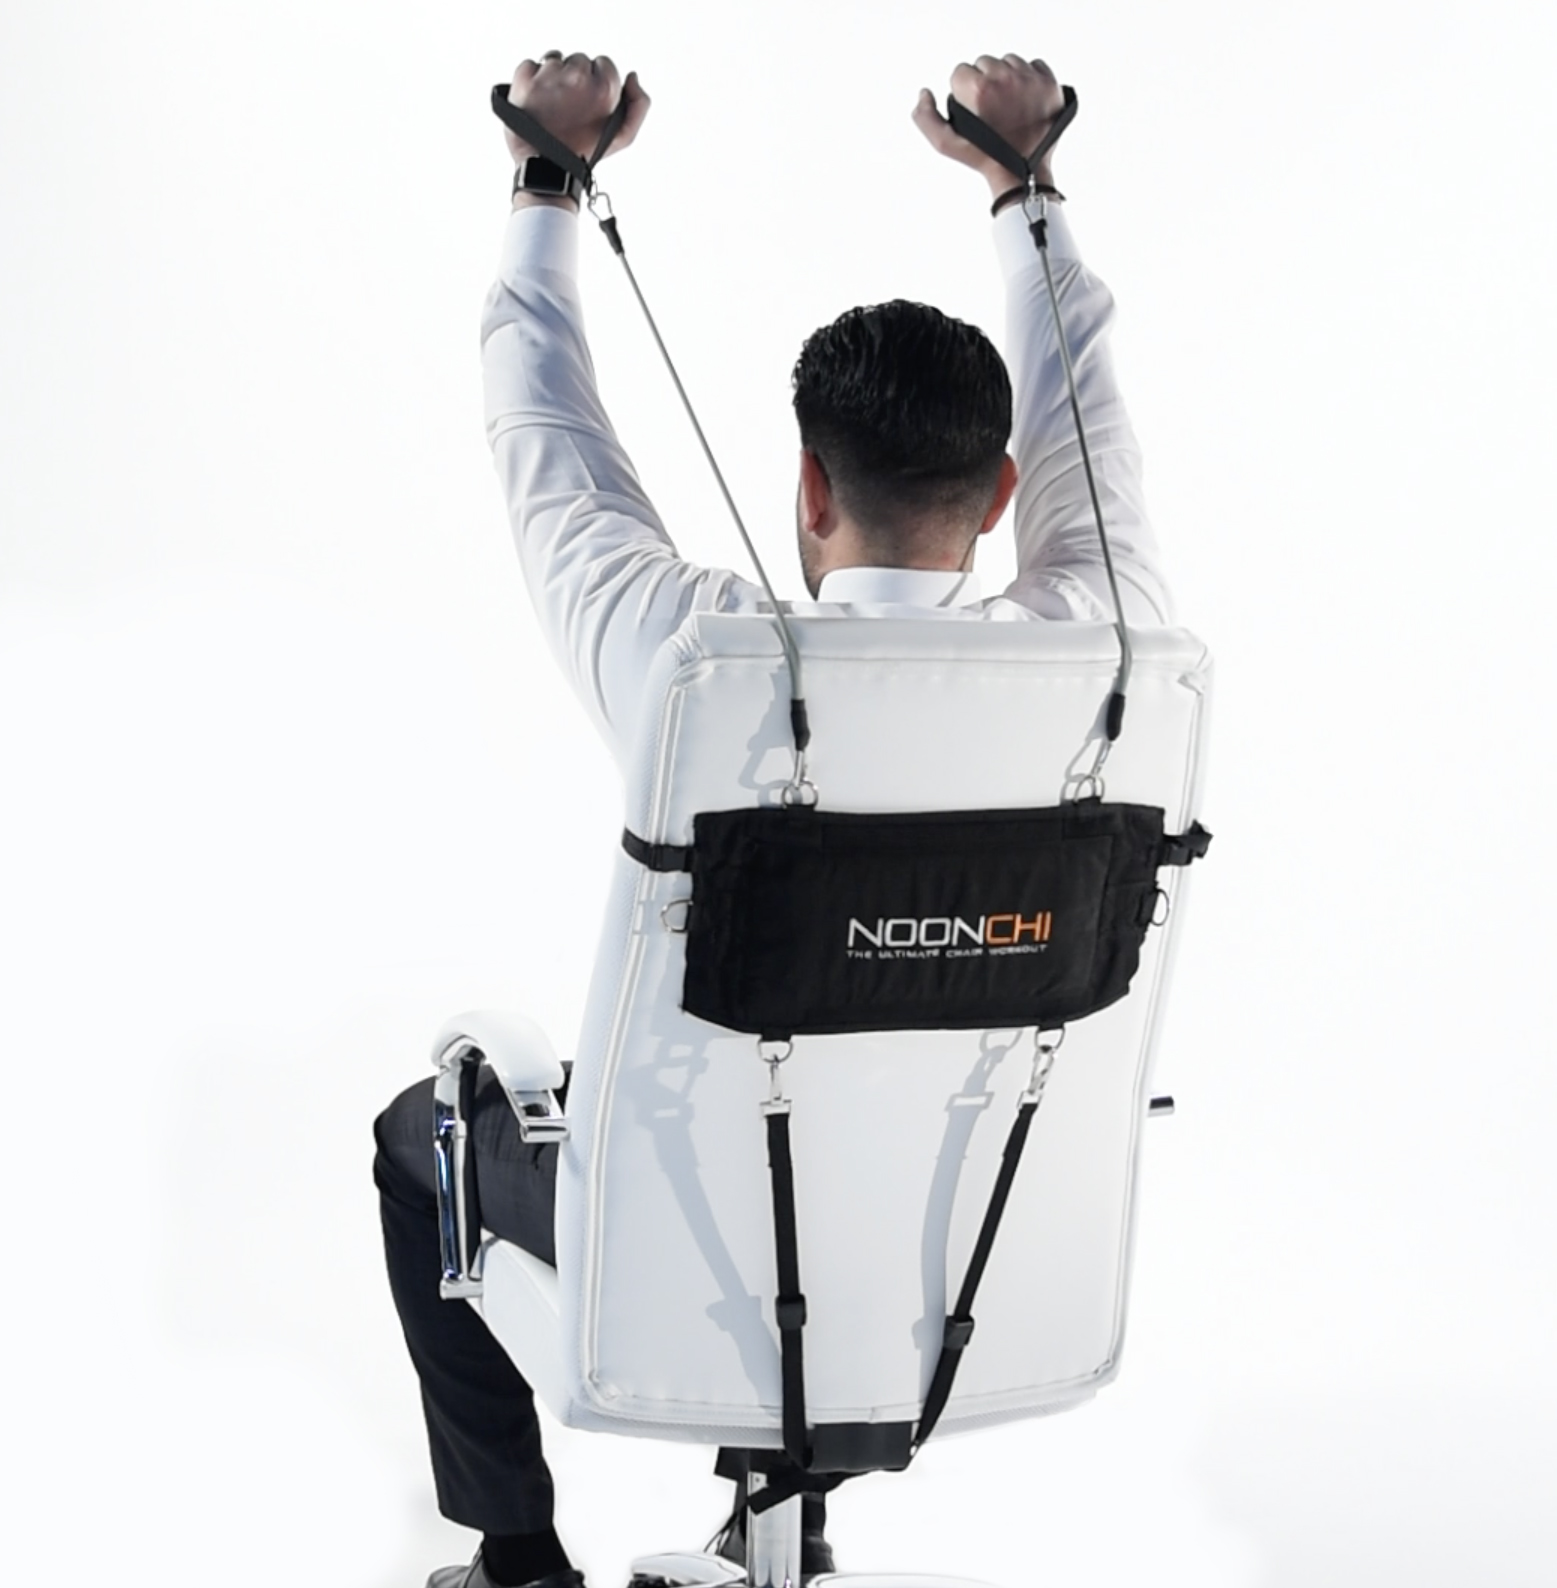 Noonchi Starts the New Year With a Portable Office Chair Workout That